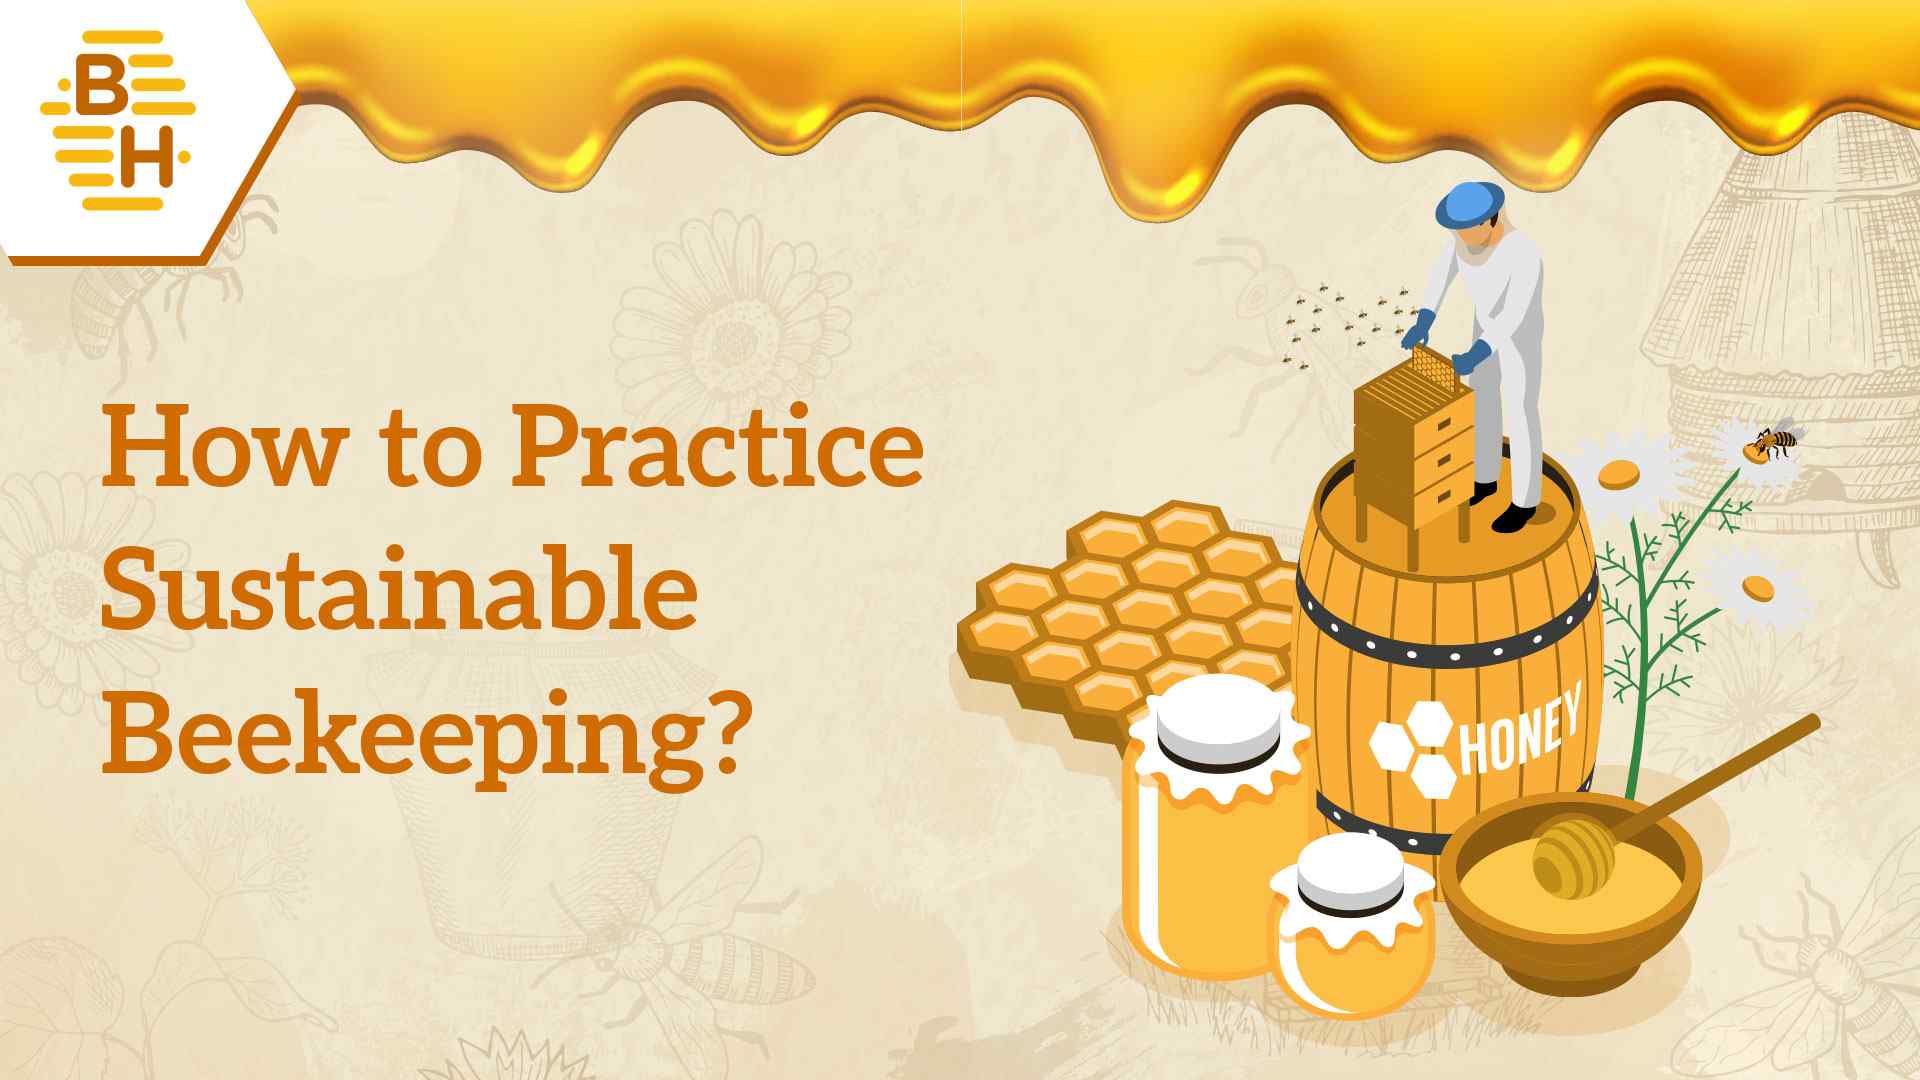 I. Introduction to Sustainable Beekeeping Practices